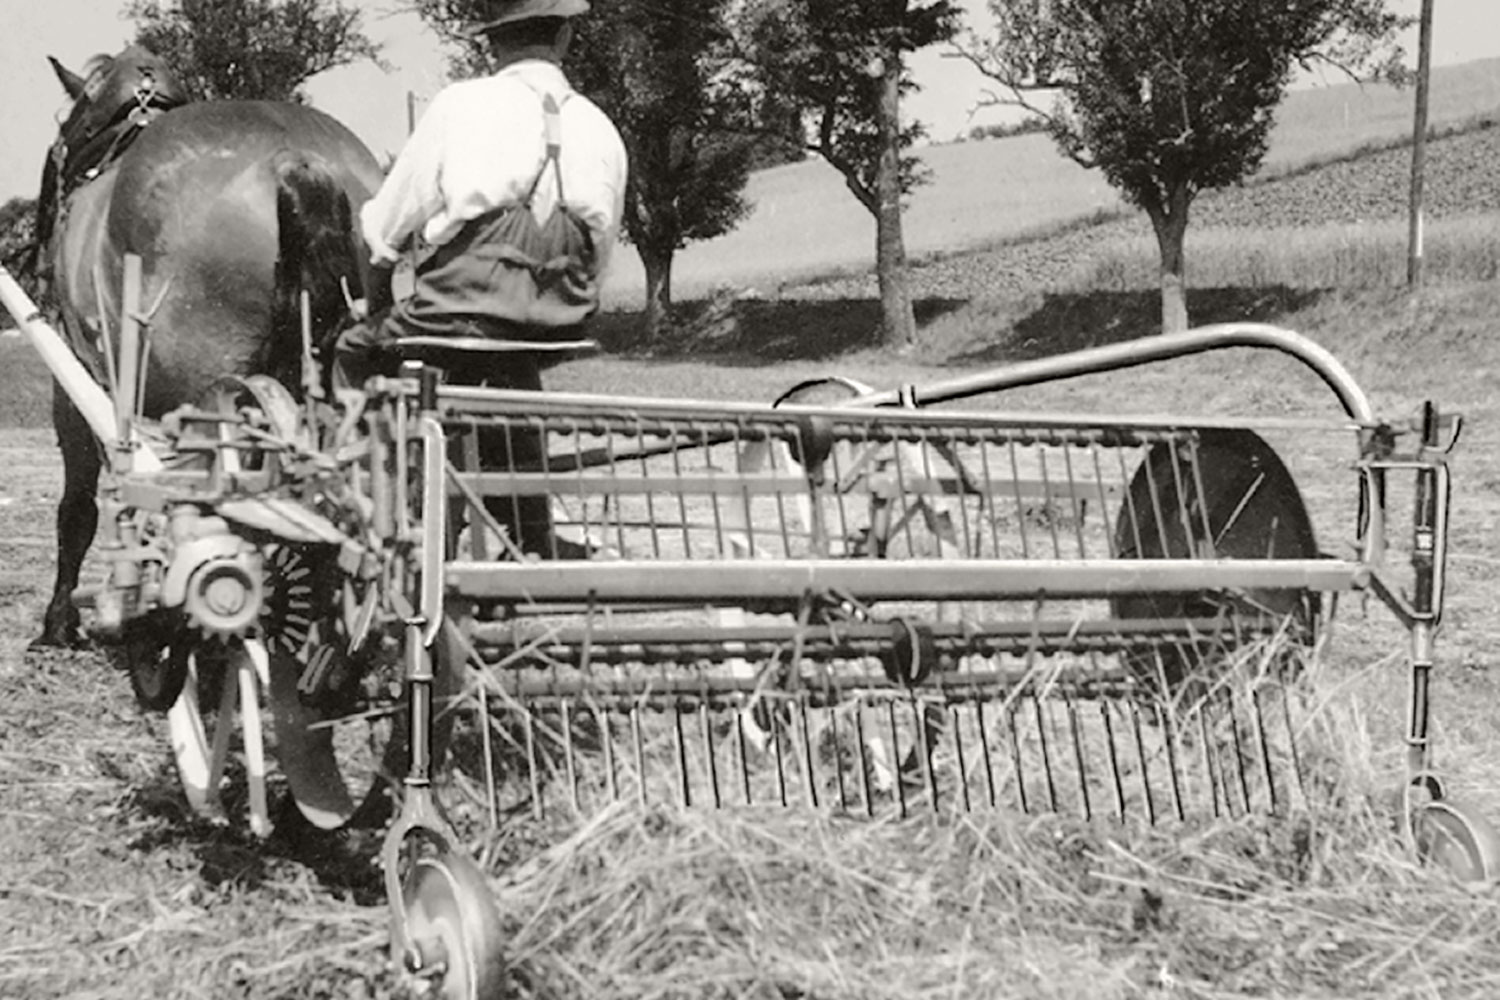 A PÖTTINGER swath rake in action during harvesting in 1949. The “tractor” has an output of 1 horsepower.